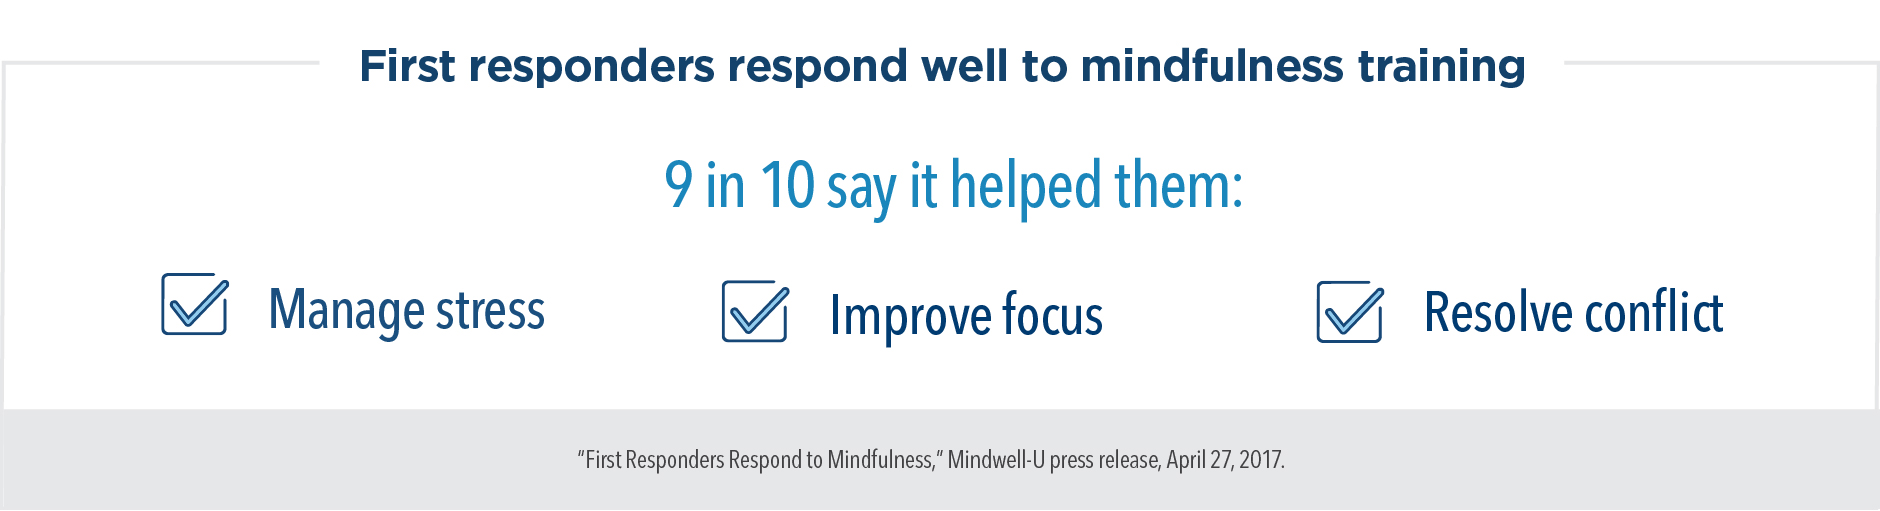 First responders respond well to mindfulness training. 9 in 10 say it helped them manage stress, improve focus, and resolve conflict.